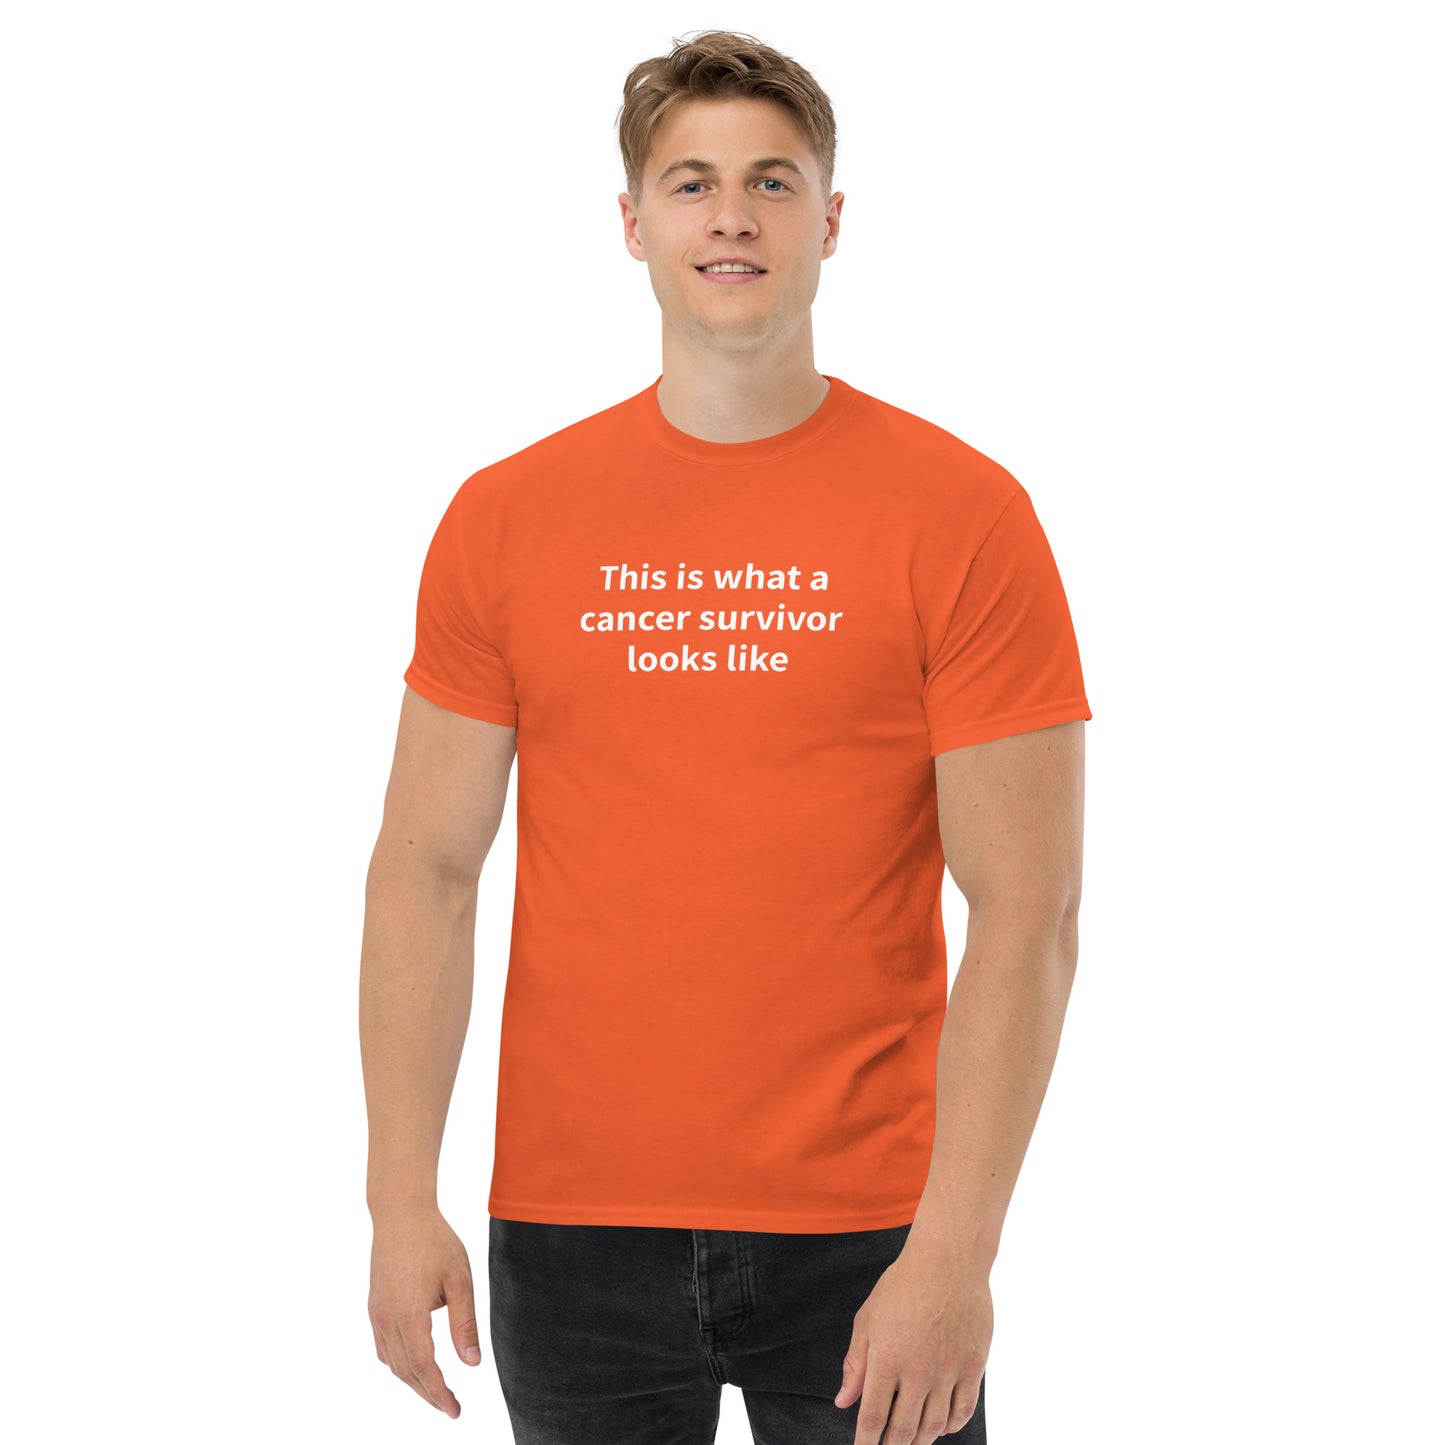 This is what a cancer survivor looks like short sleeve t-shirt (unisex)